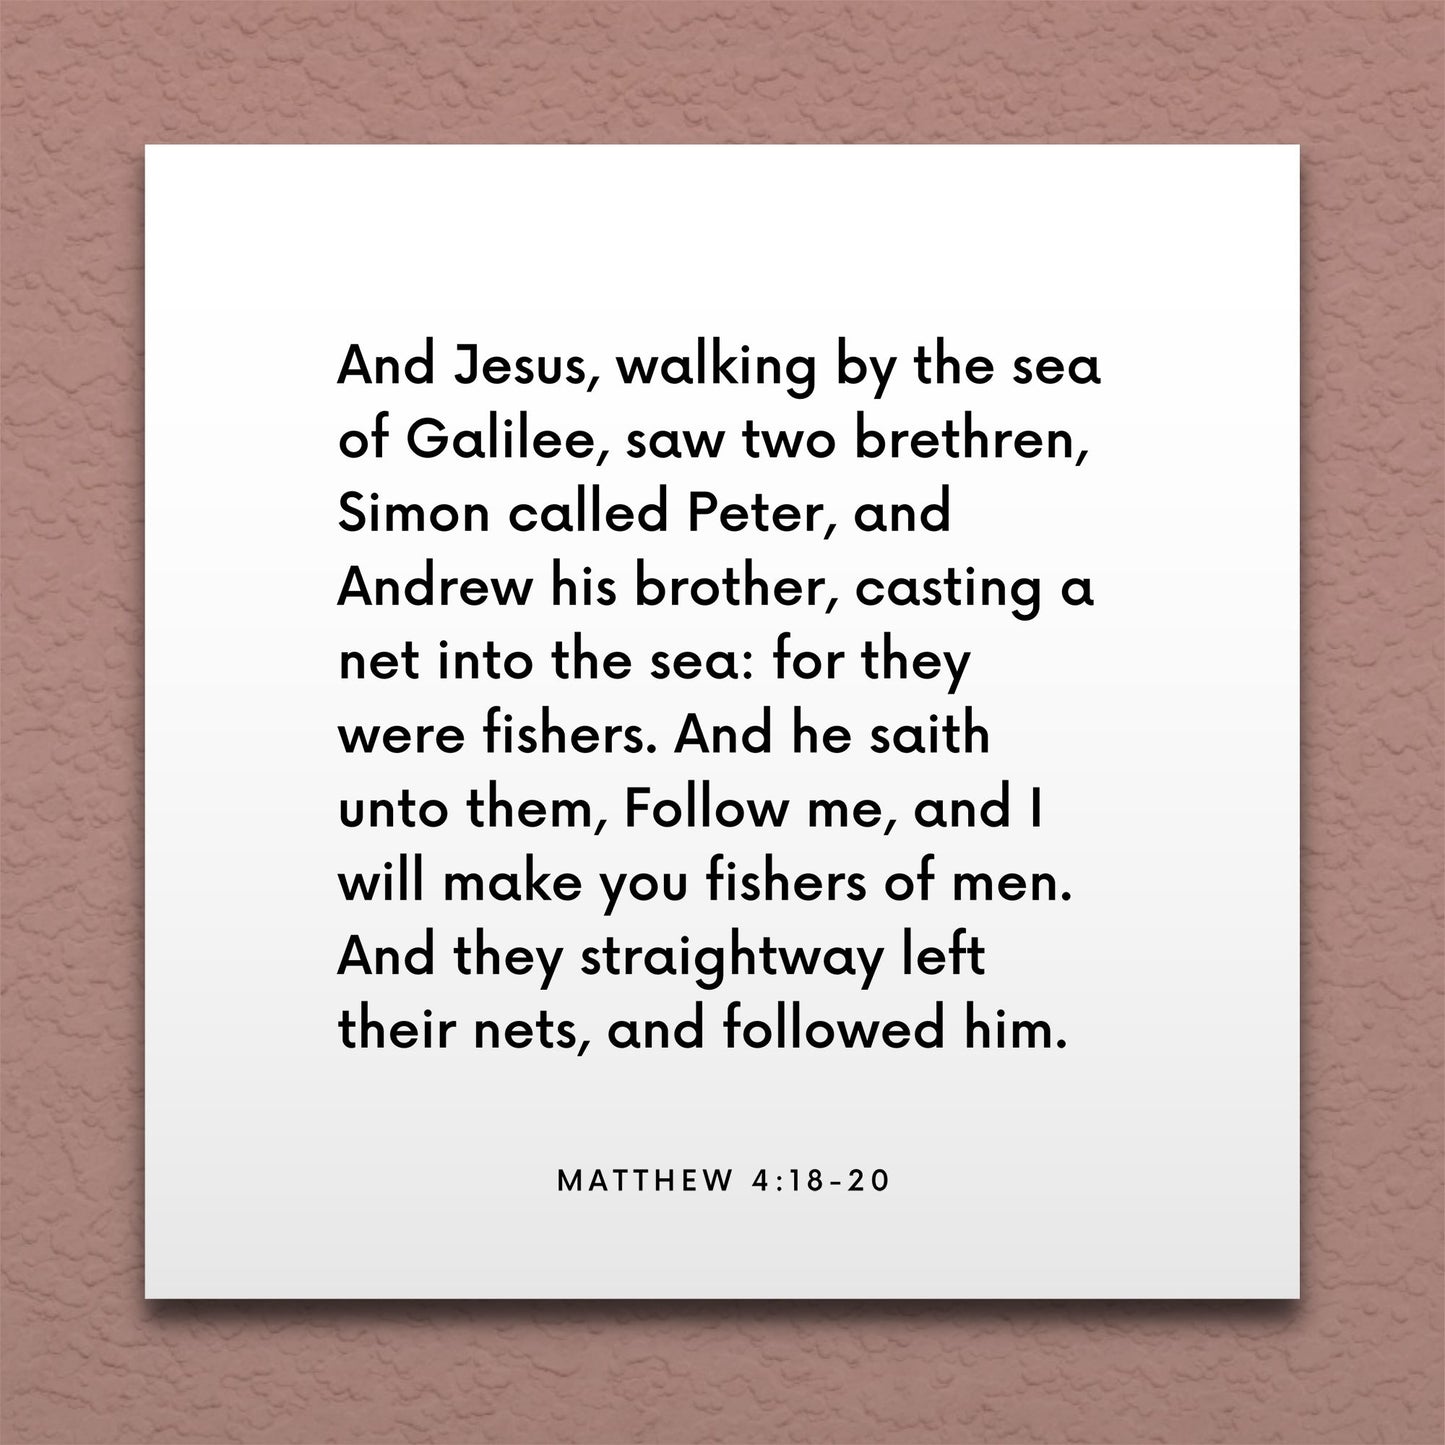 Wall-mounted scripture tile for Matthew 4:18-20 - "Follow me, and I will make you fishers of men"